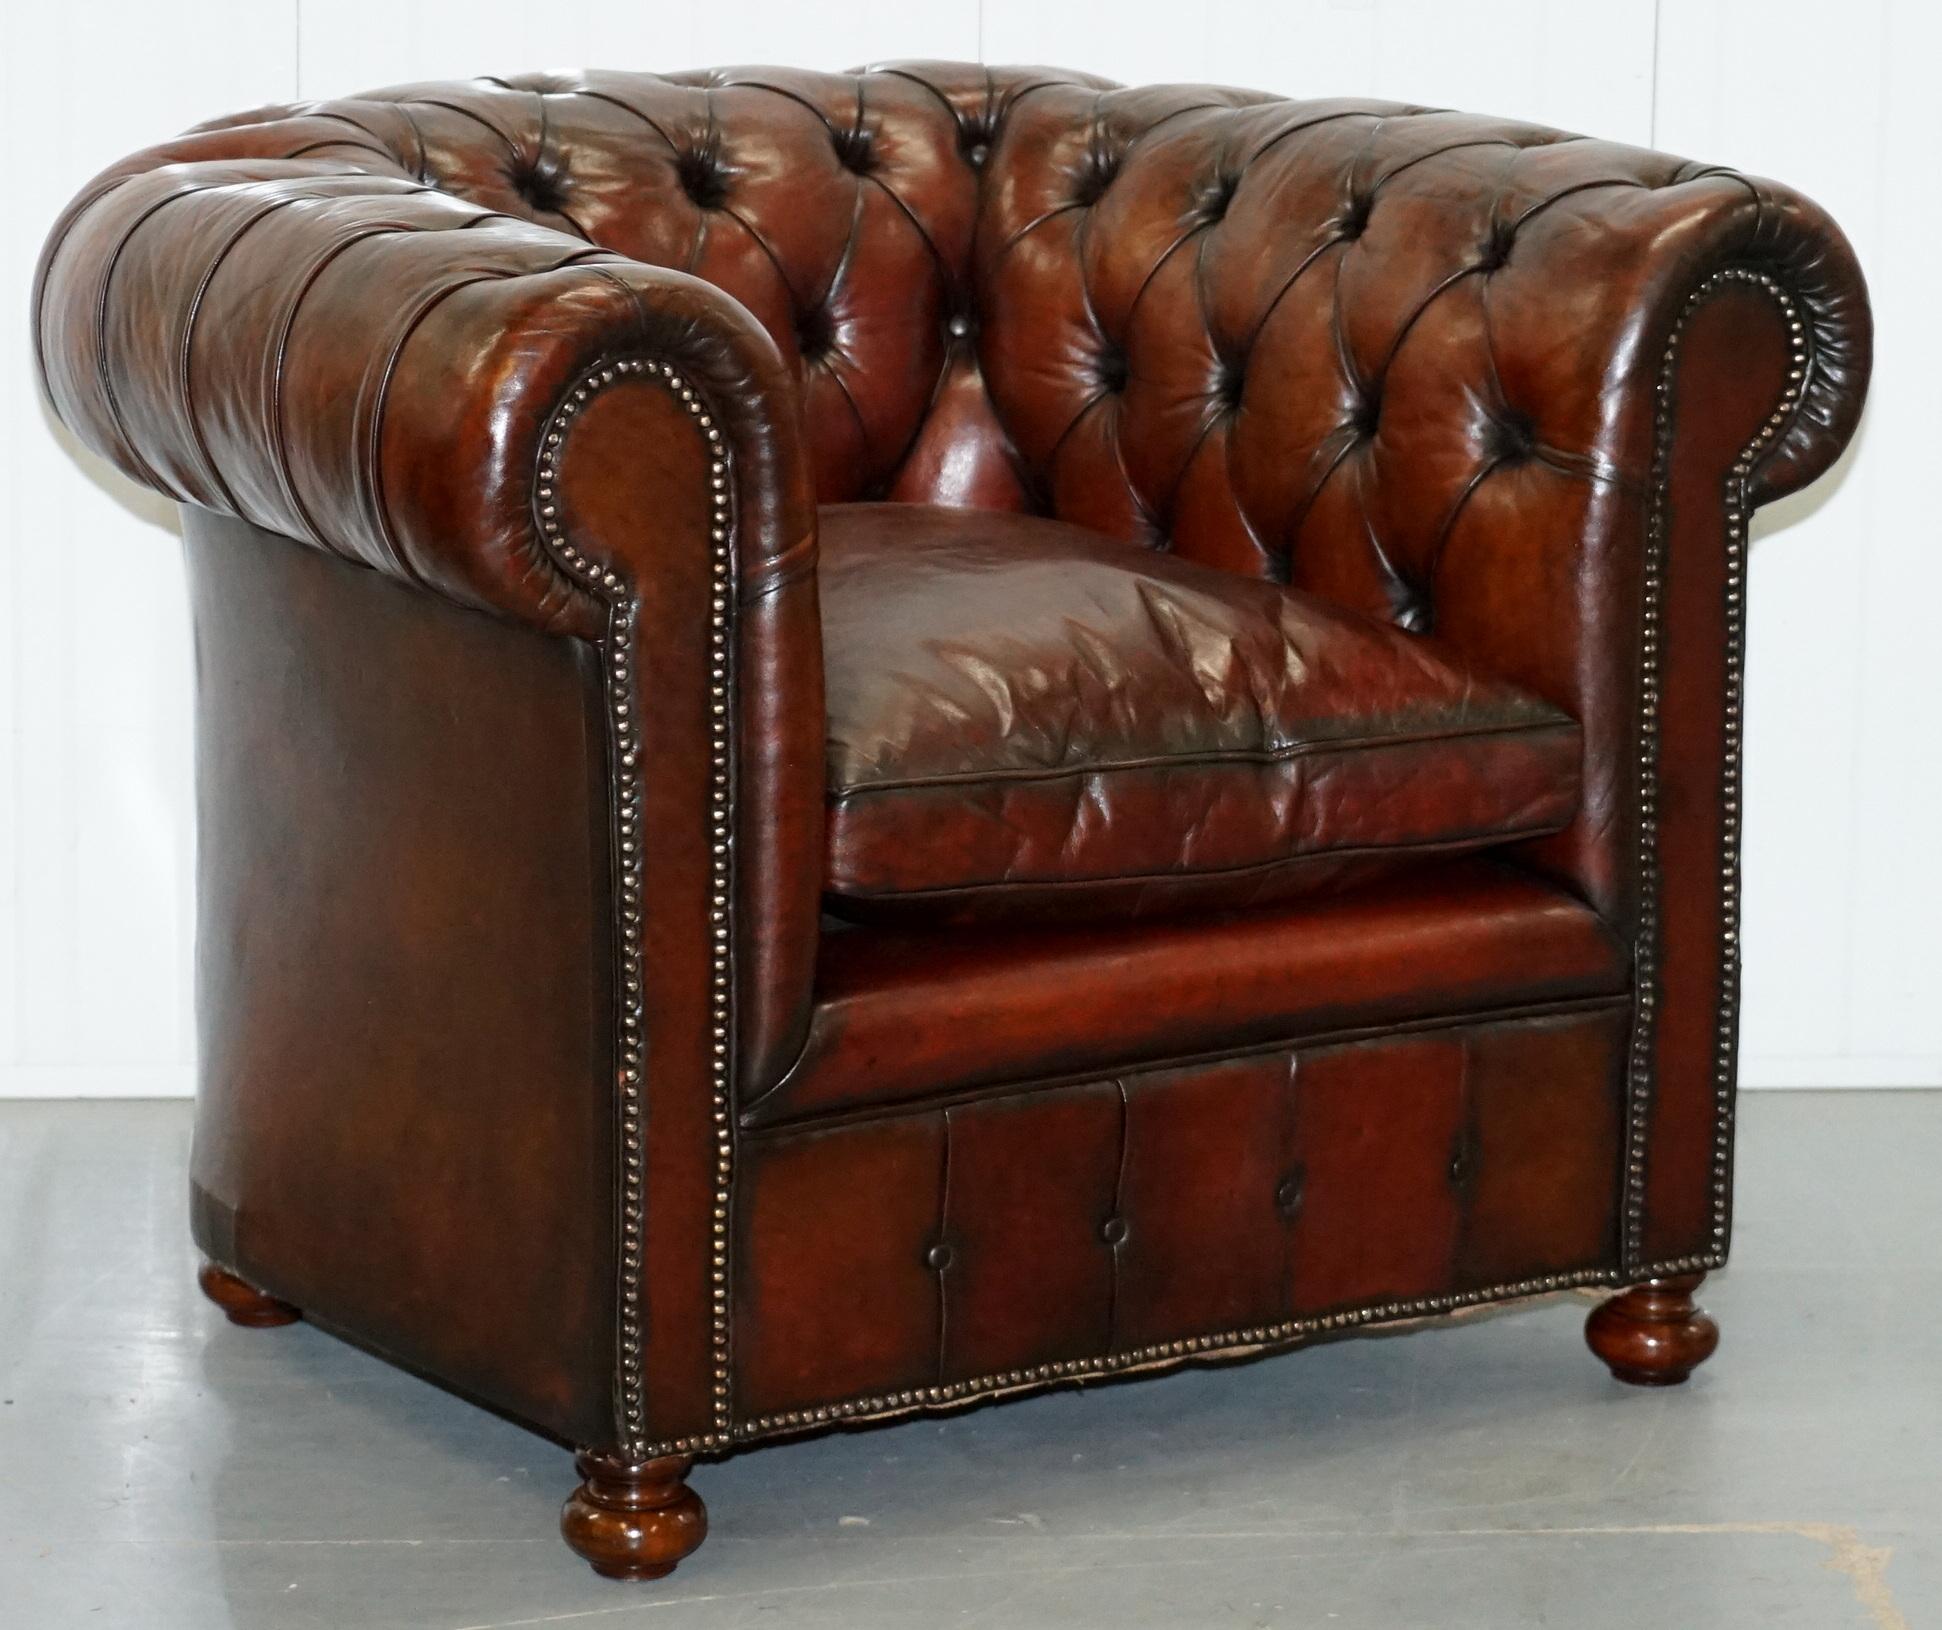 Wimbledon-Furniture

Wimbledon-Furniture is delighted to offer for sale this rare pair of vintage, circa 1920s Chesterfield fully restored Cigar brown leather club armchairs with feather filled cushions

Please note the delivery fee listed is